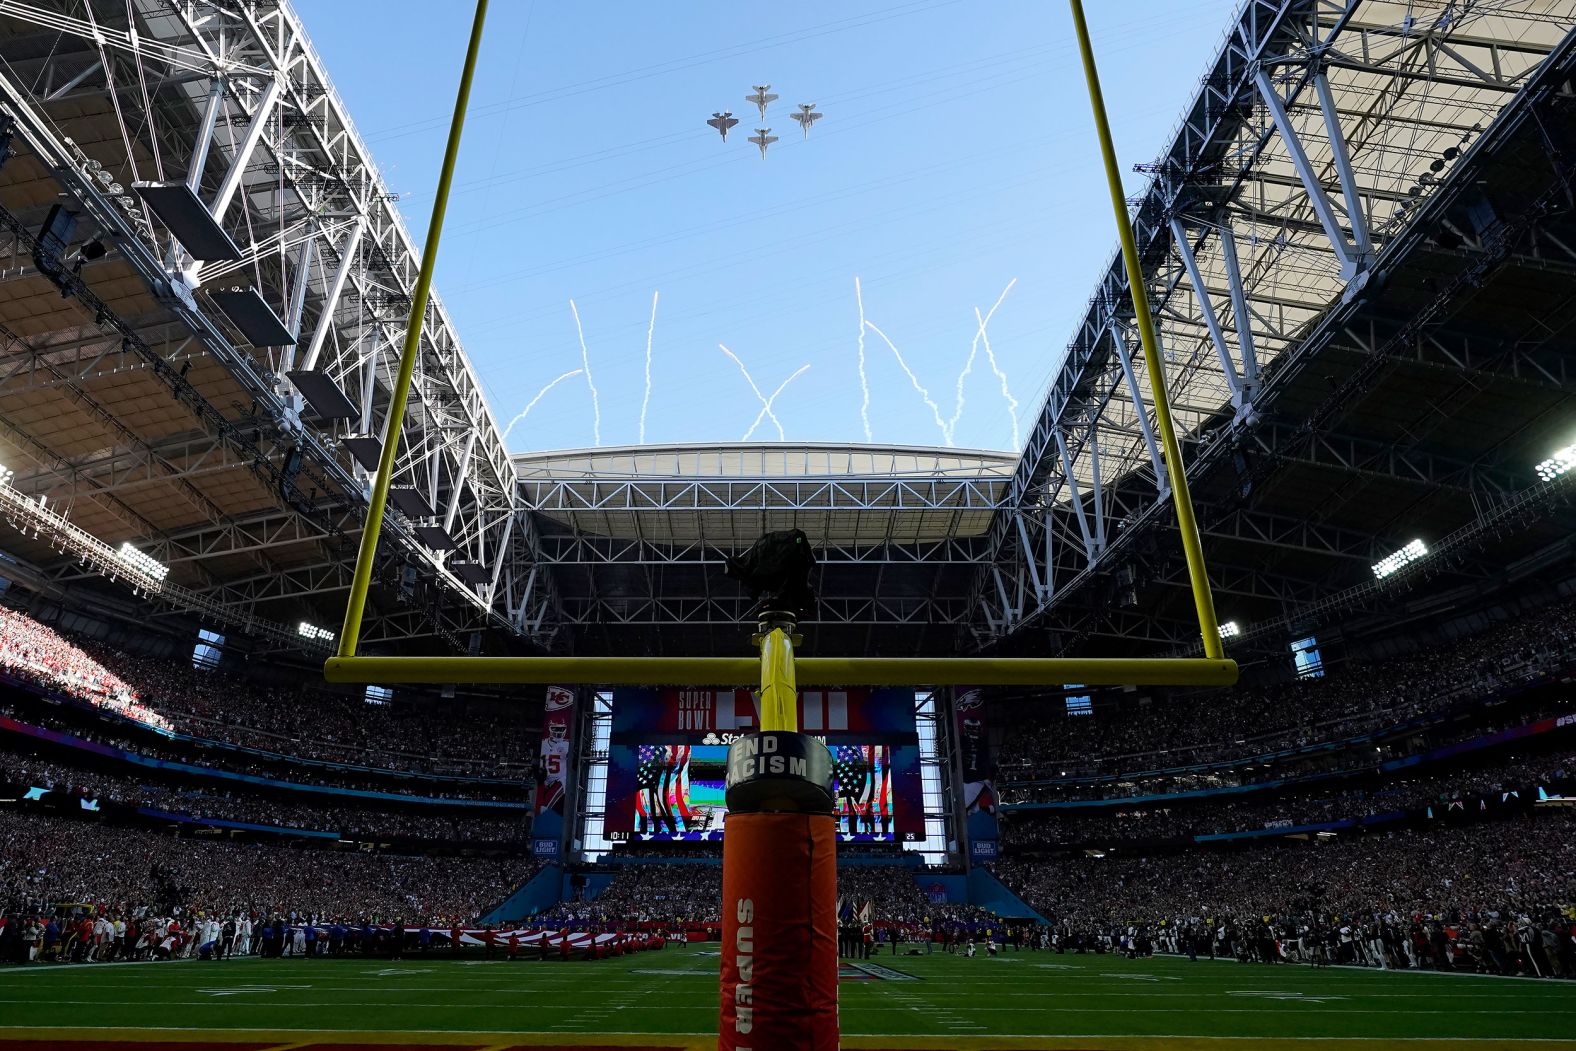 US Navy jets fly over State Farm Stadium before the start of the game. For the first time ever, the ceremonial act <a href="https://www.cnn.com/2023/02/10/sport/all-women-flyover-super-bowl-lvii-spt-intl/index.html" target="_blank">was performed by an all-women crew</a>.